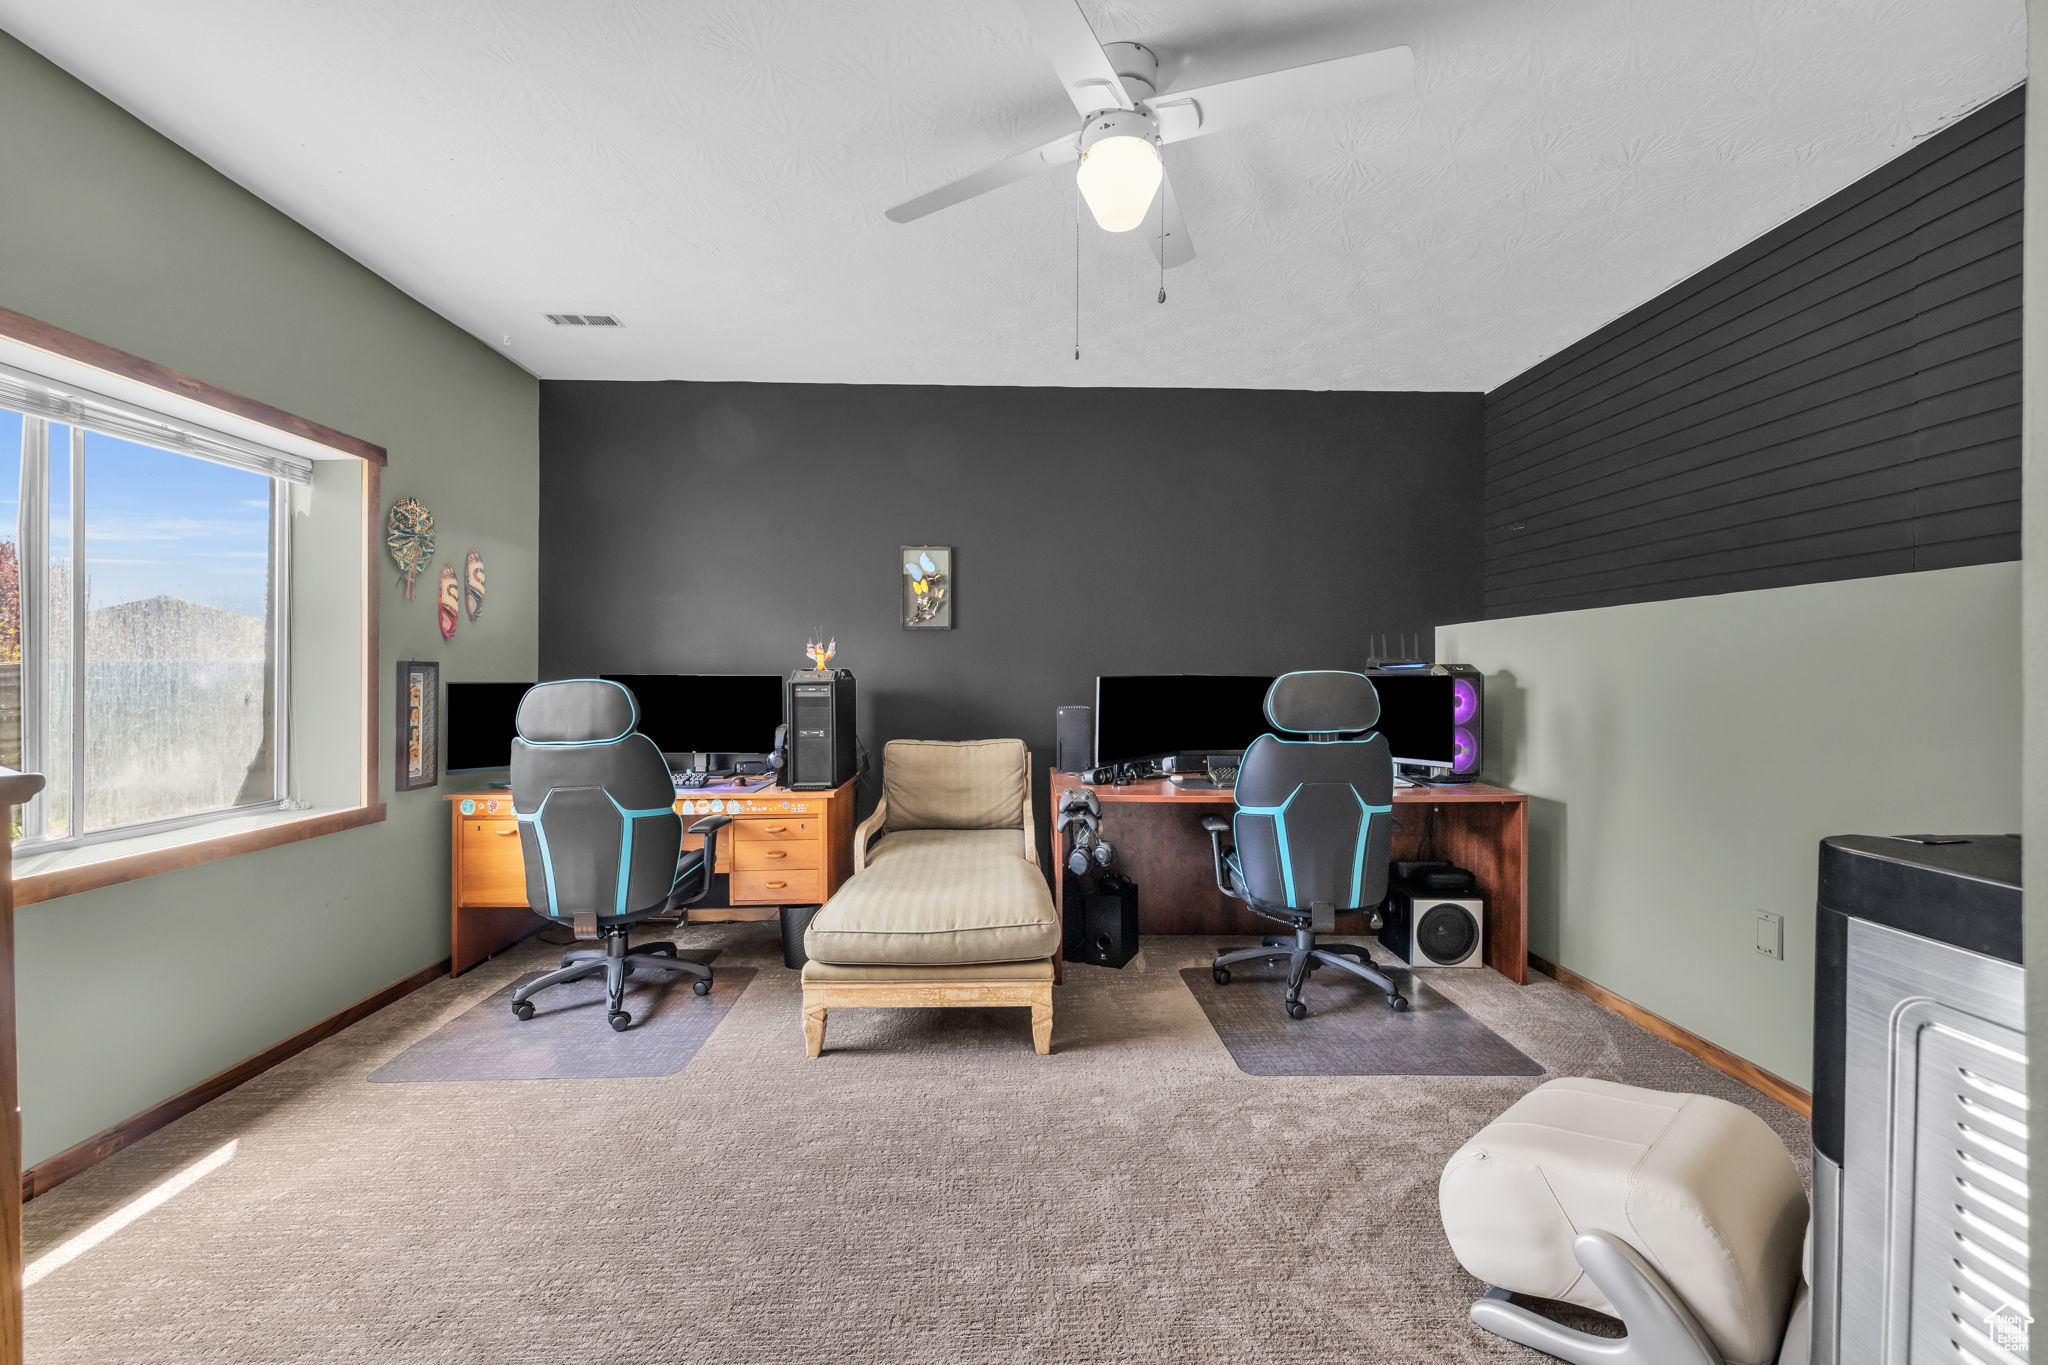 Office area featuring carpet floors and ceiling fan